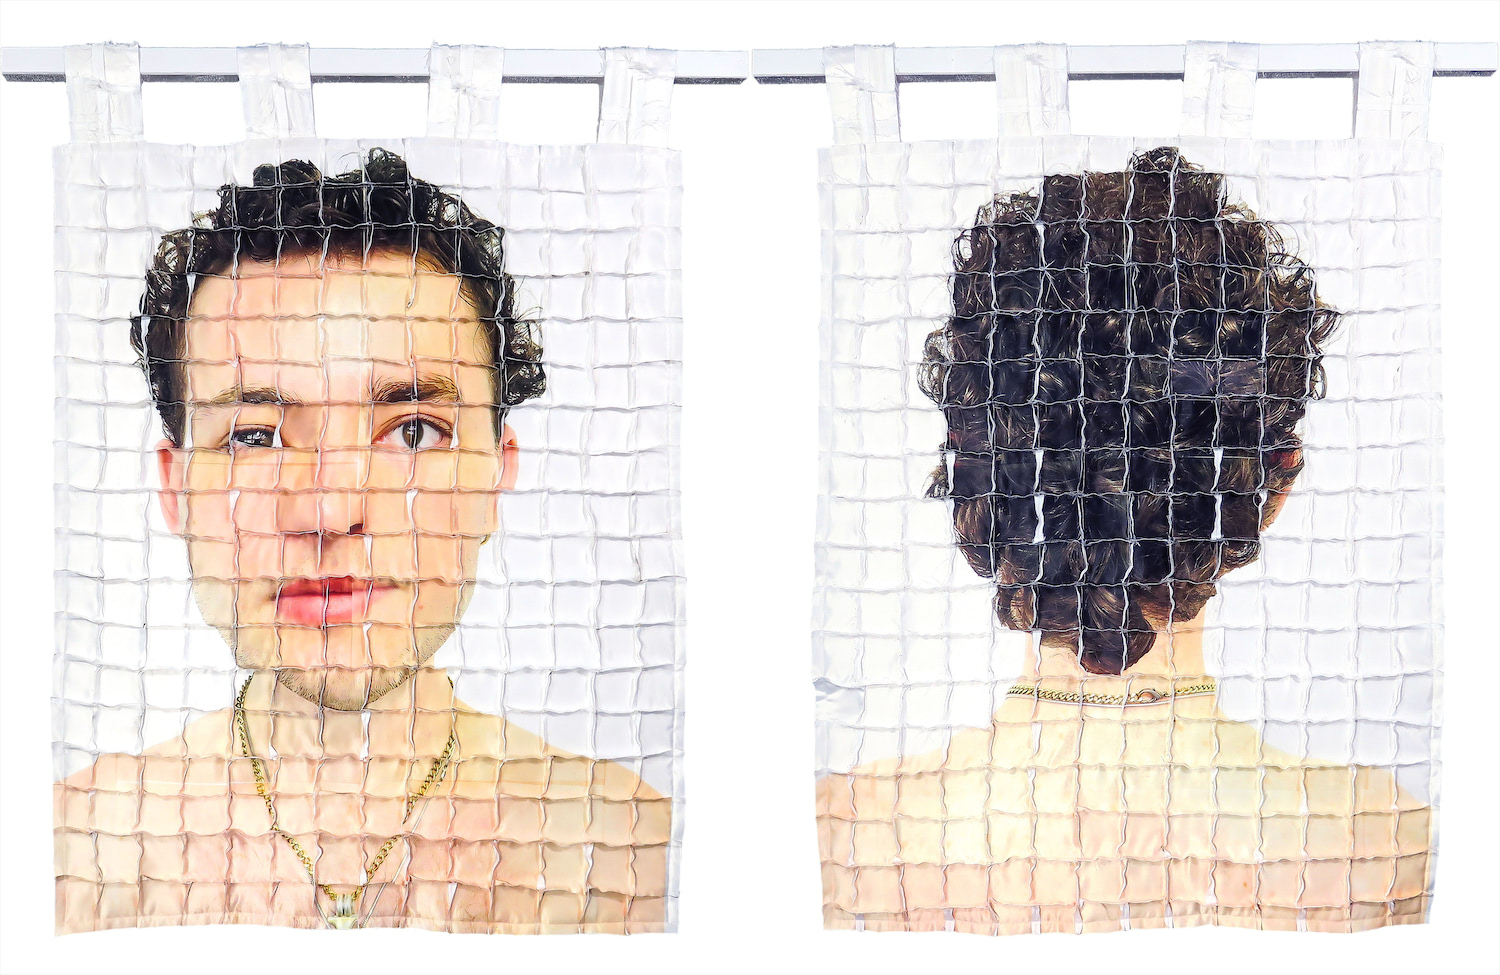 Left: Front side of quilt #3 with the artist's face distorted by a gridded system of seams that are sticking out. Right: Back side of quilt #3 with the back of the artist's head and shoulders distorted by a gridded system of seams that are sticking out.